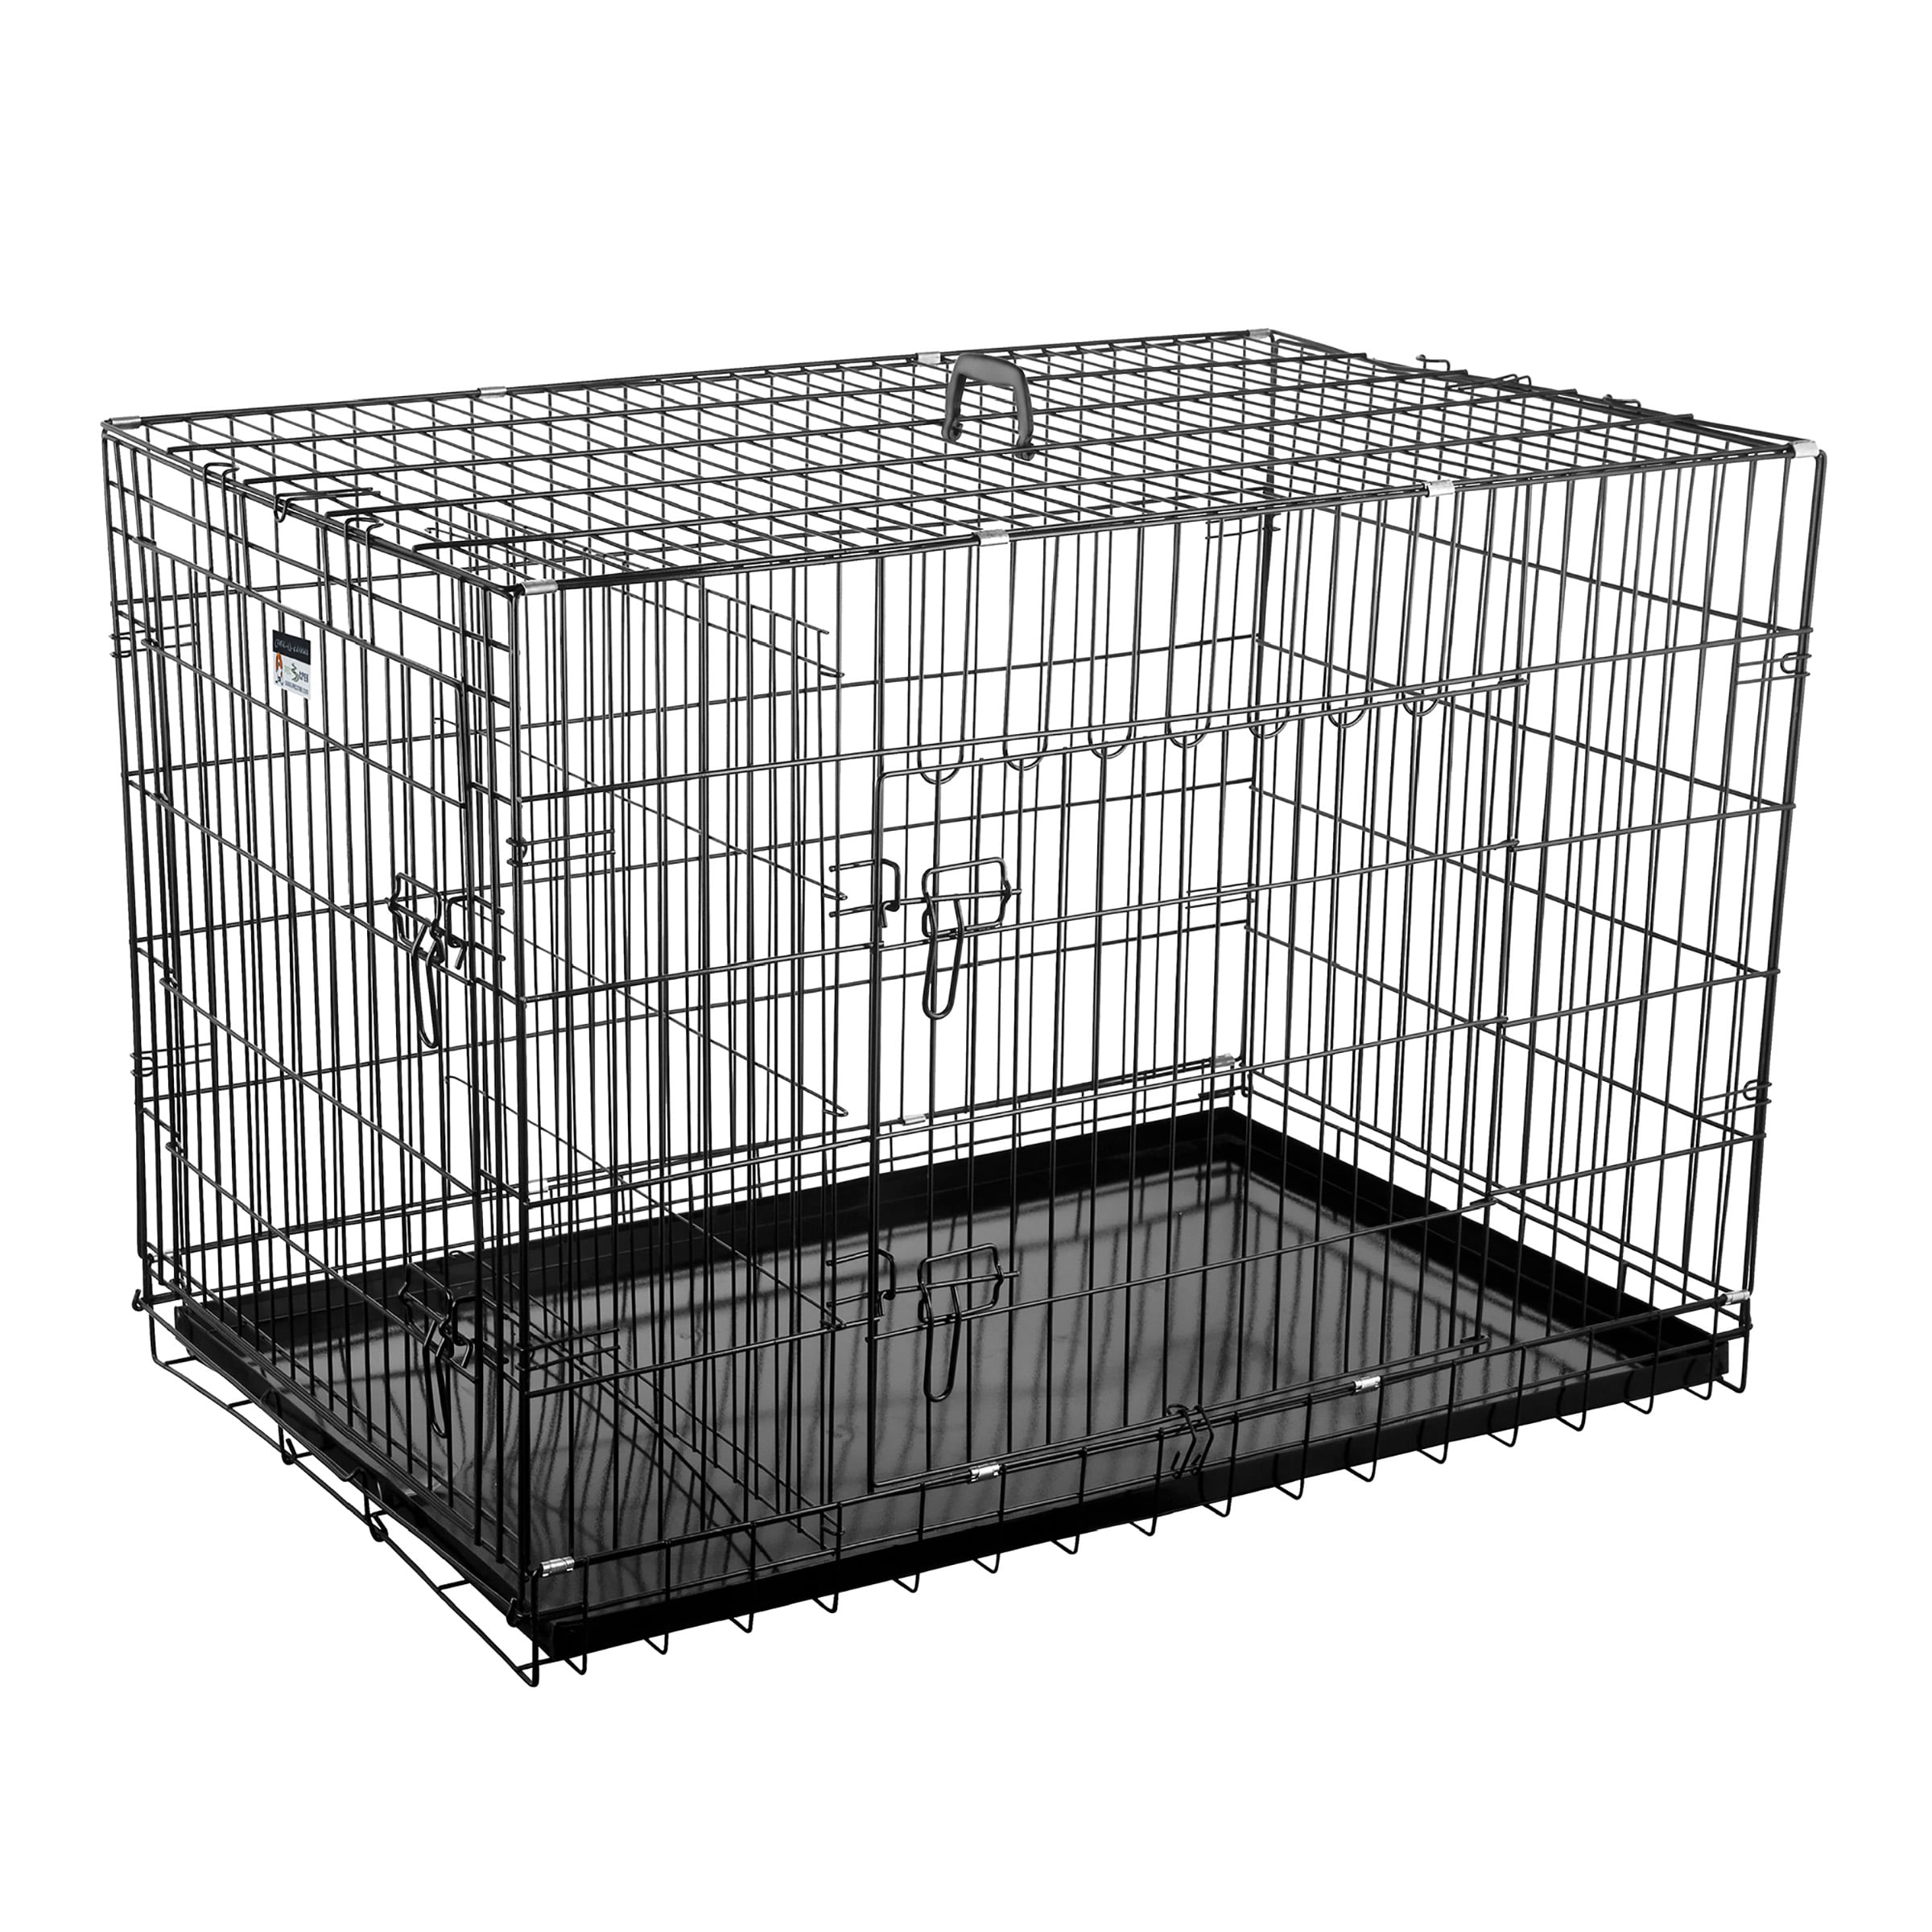 Cats or Rabbits Pet Trex 42 Folding Pet Crate Double Door Kennel Wire Cage for Dogs 